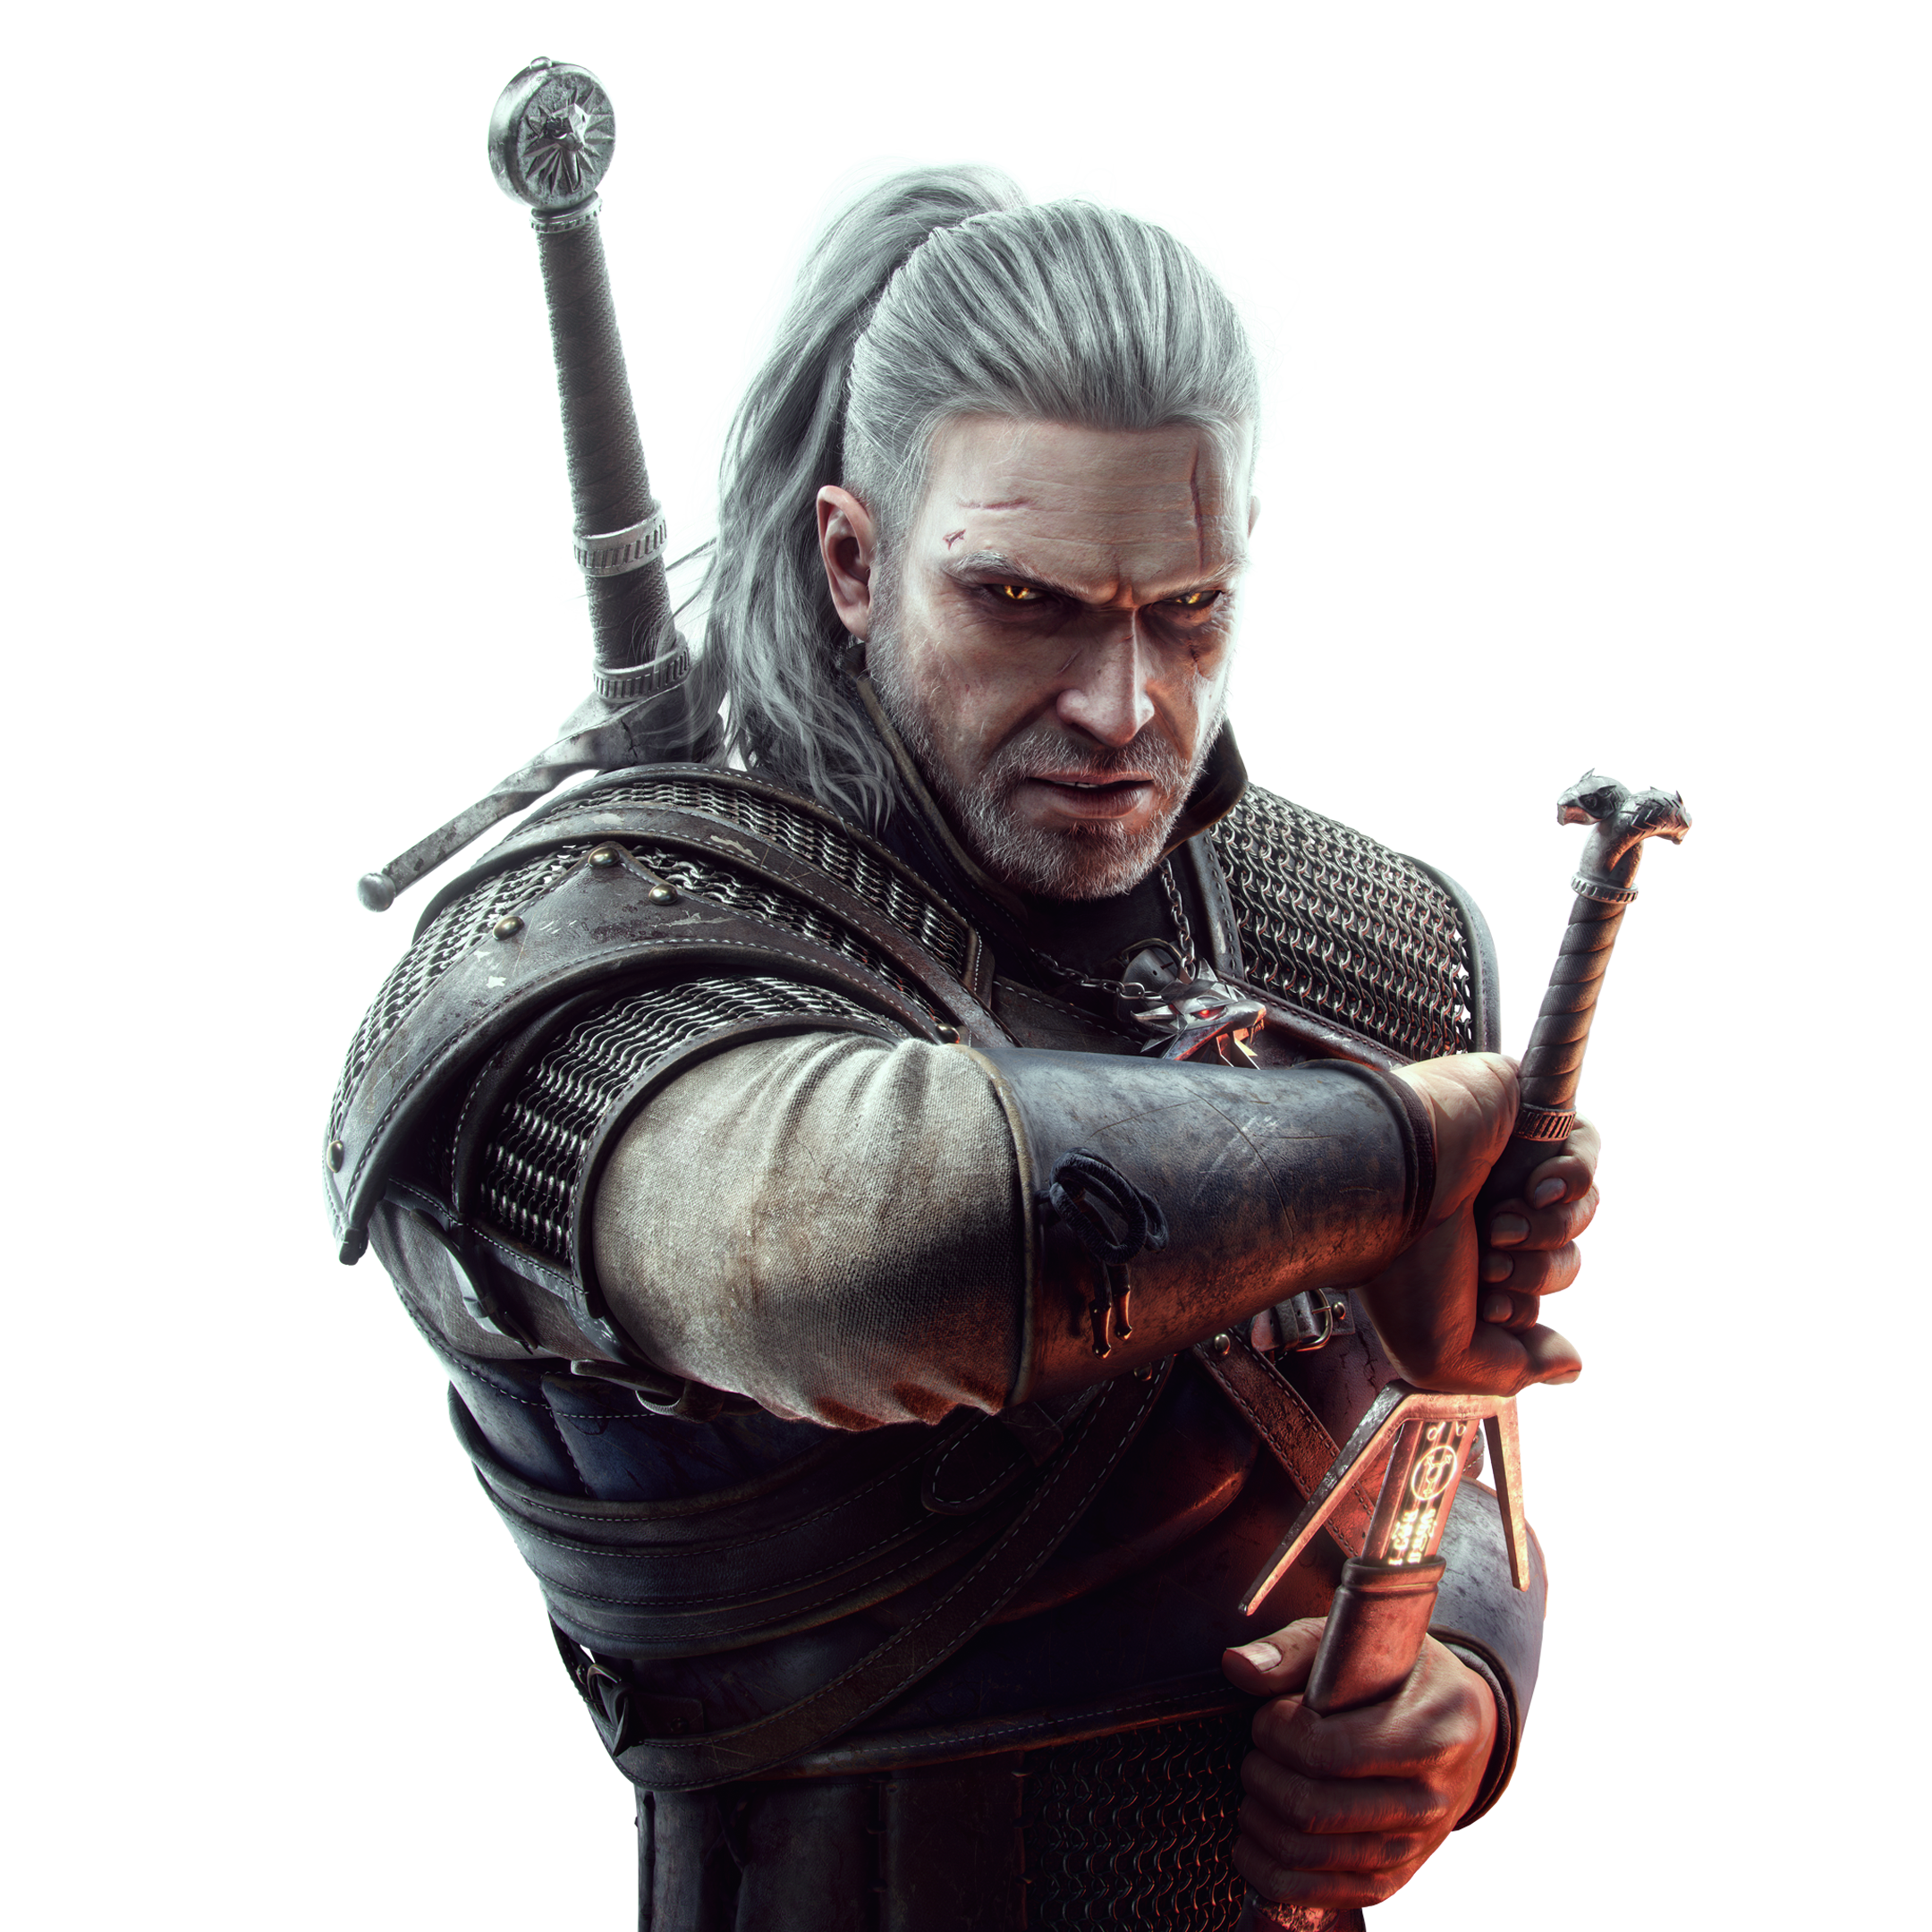 The Witcher 3 : Wild Hunt at the best price